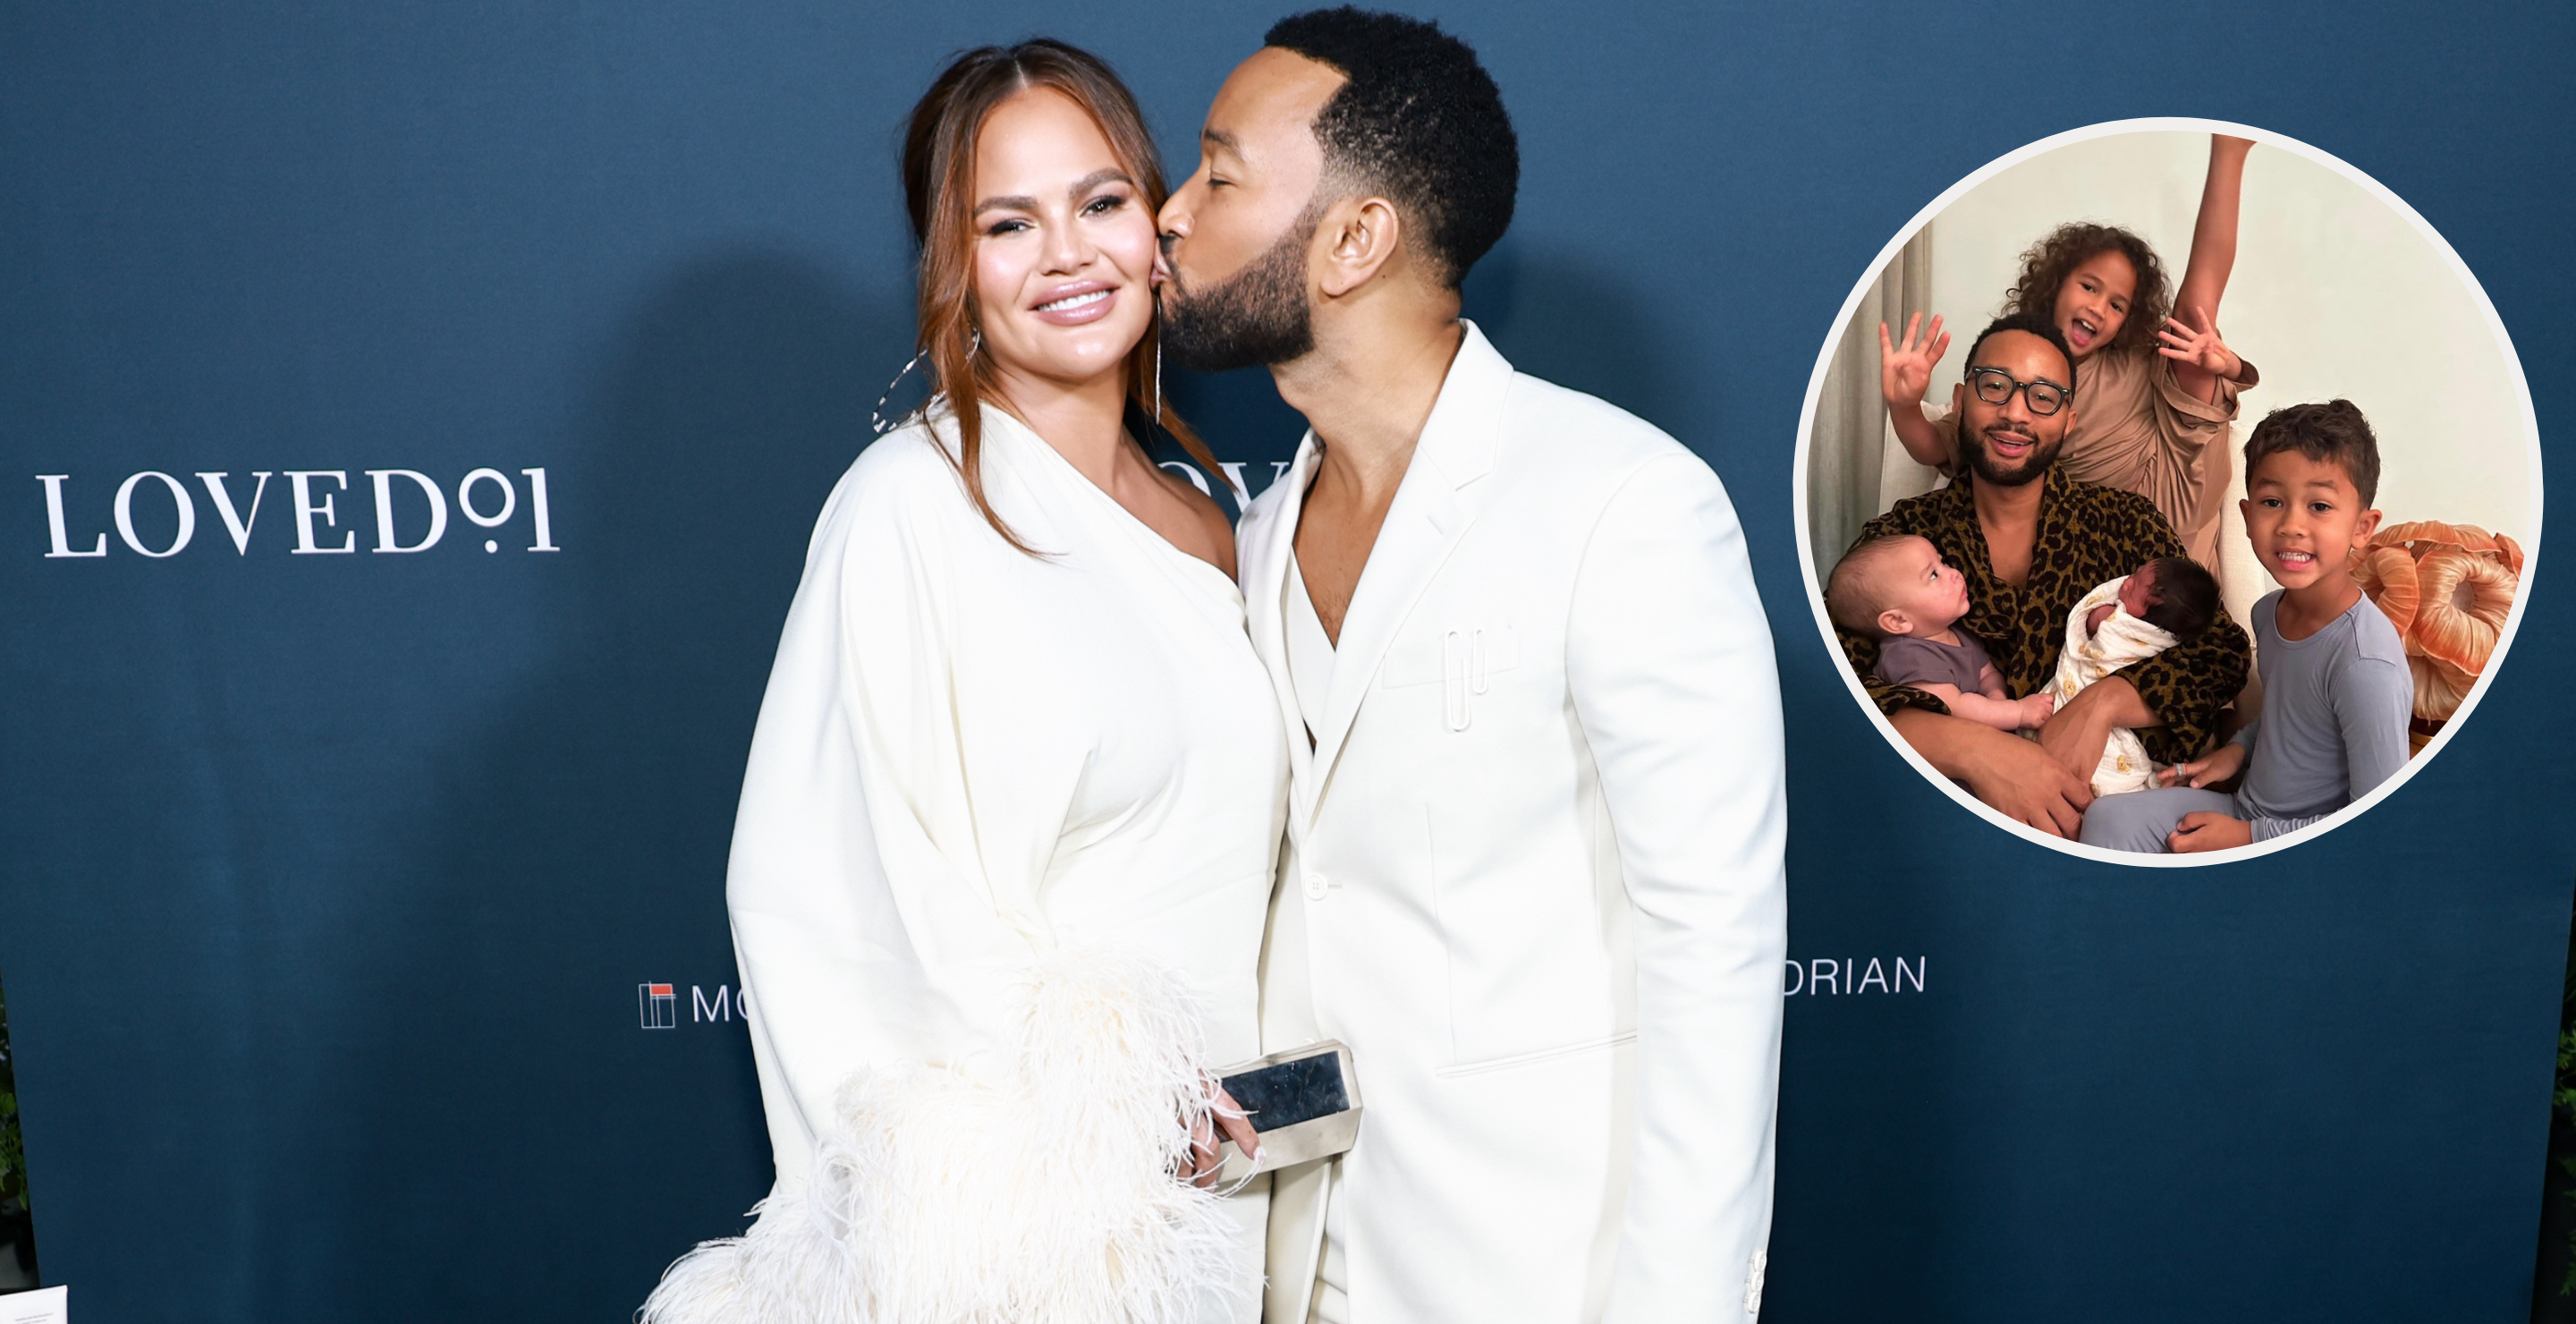 Chrissy Teigen and John Legend attend the LOVED01: Skincare by John Legend launch event at Skybar on March 07, 2023 in West Hollywood, California.